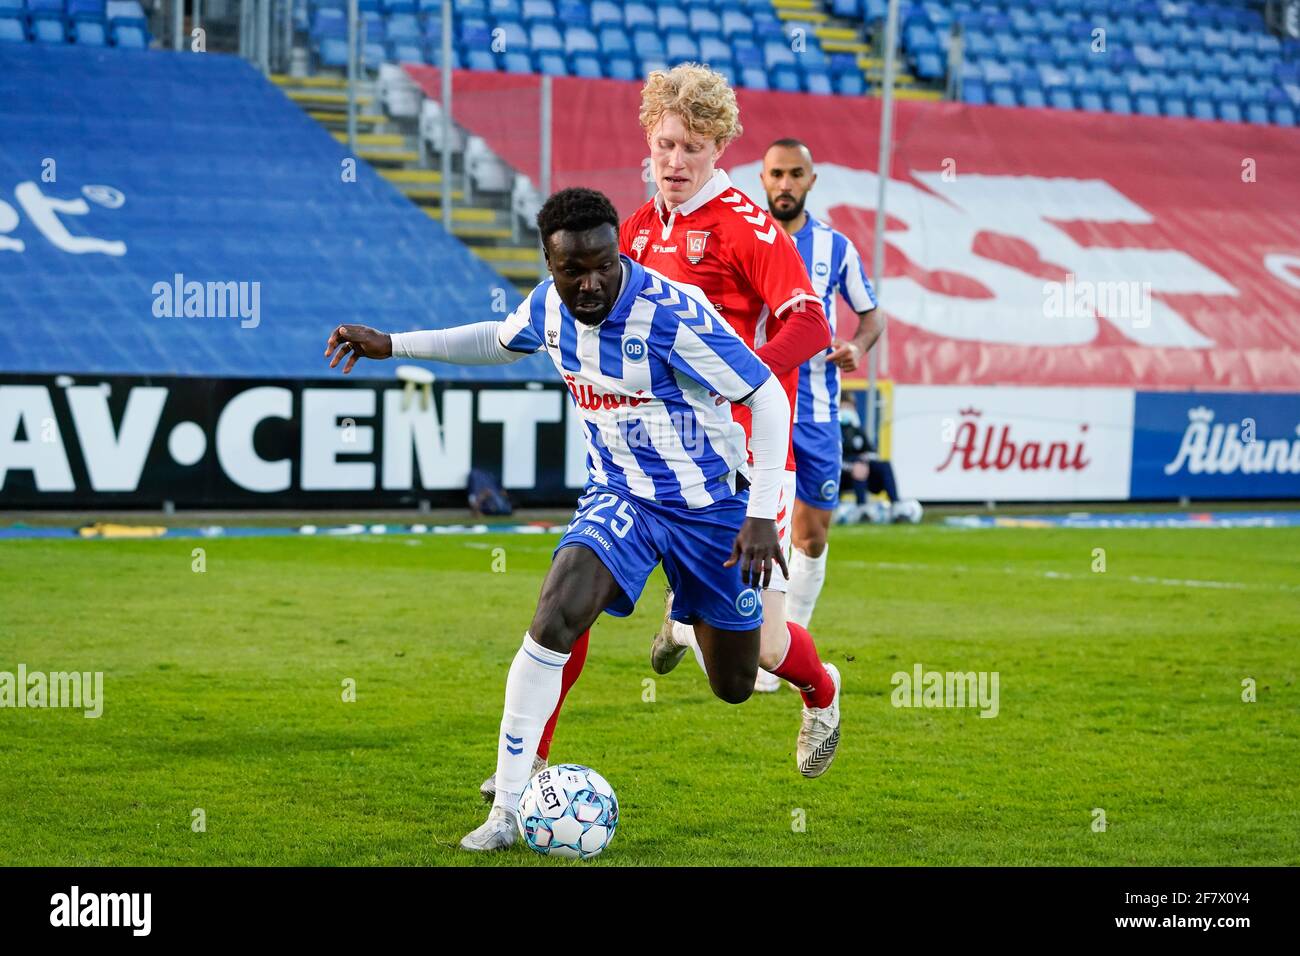 Odense, Denmark. 09th Apr, 2021. Moses Opondo (25) of OB and Tobias  Molgaard (44) of Vejle Boldklub seen during the 3F Superliga match between  Odense Boldklub and Vejle Boldklub at Nature Energy